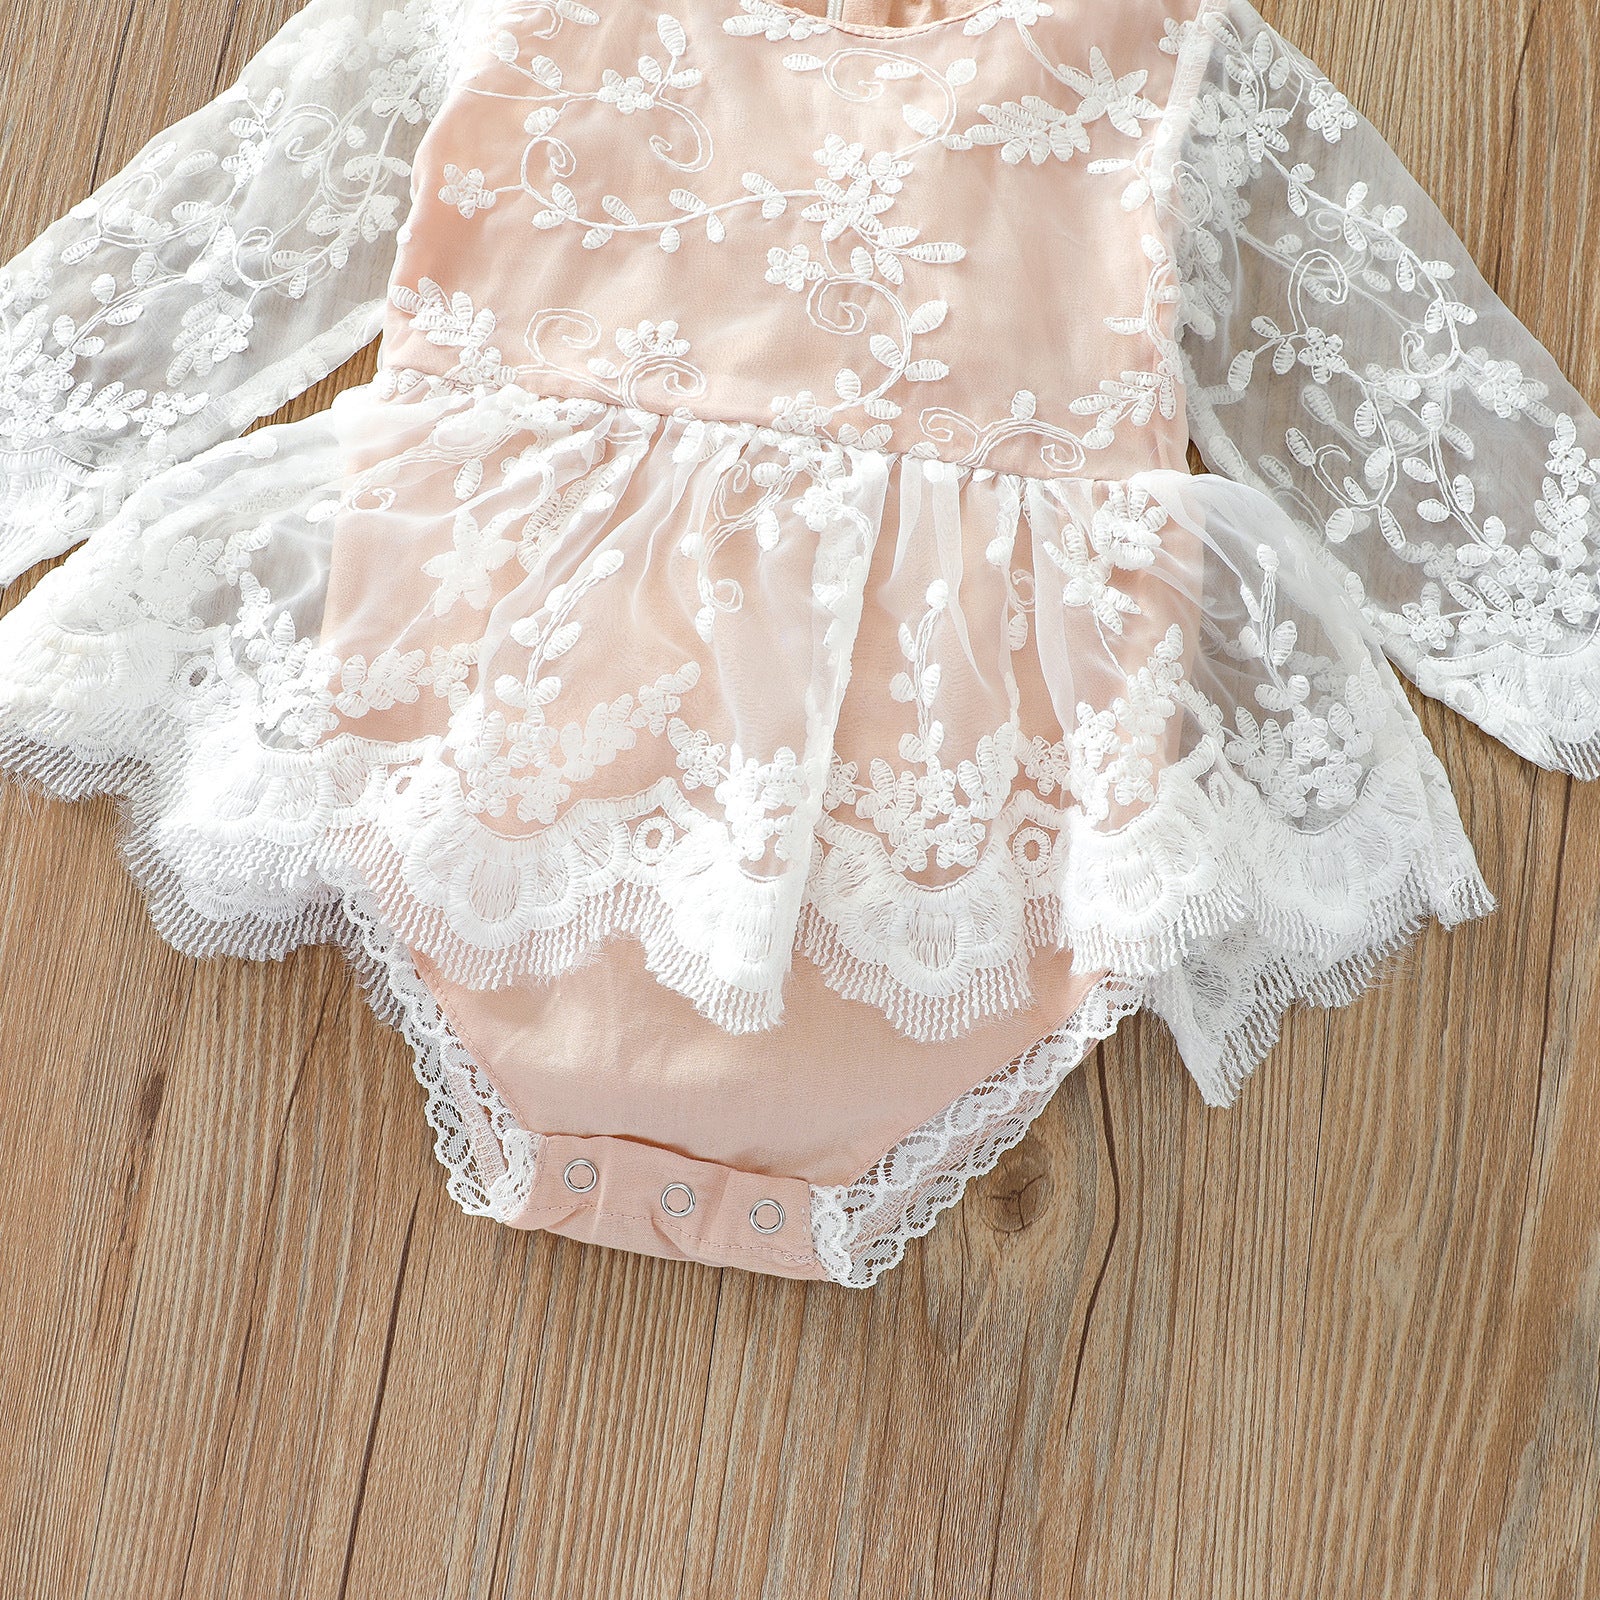 Baby Girl Floral Embroidered Mesh Overlay Design Onesies Dress My Kids-USA